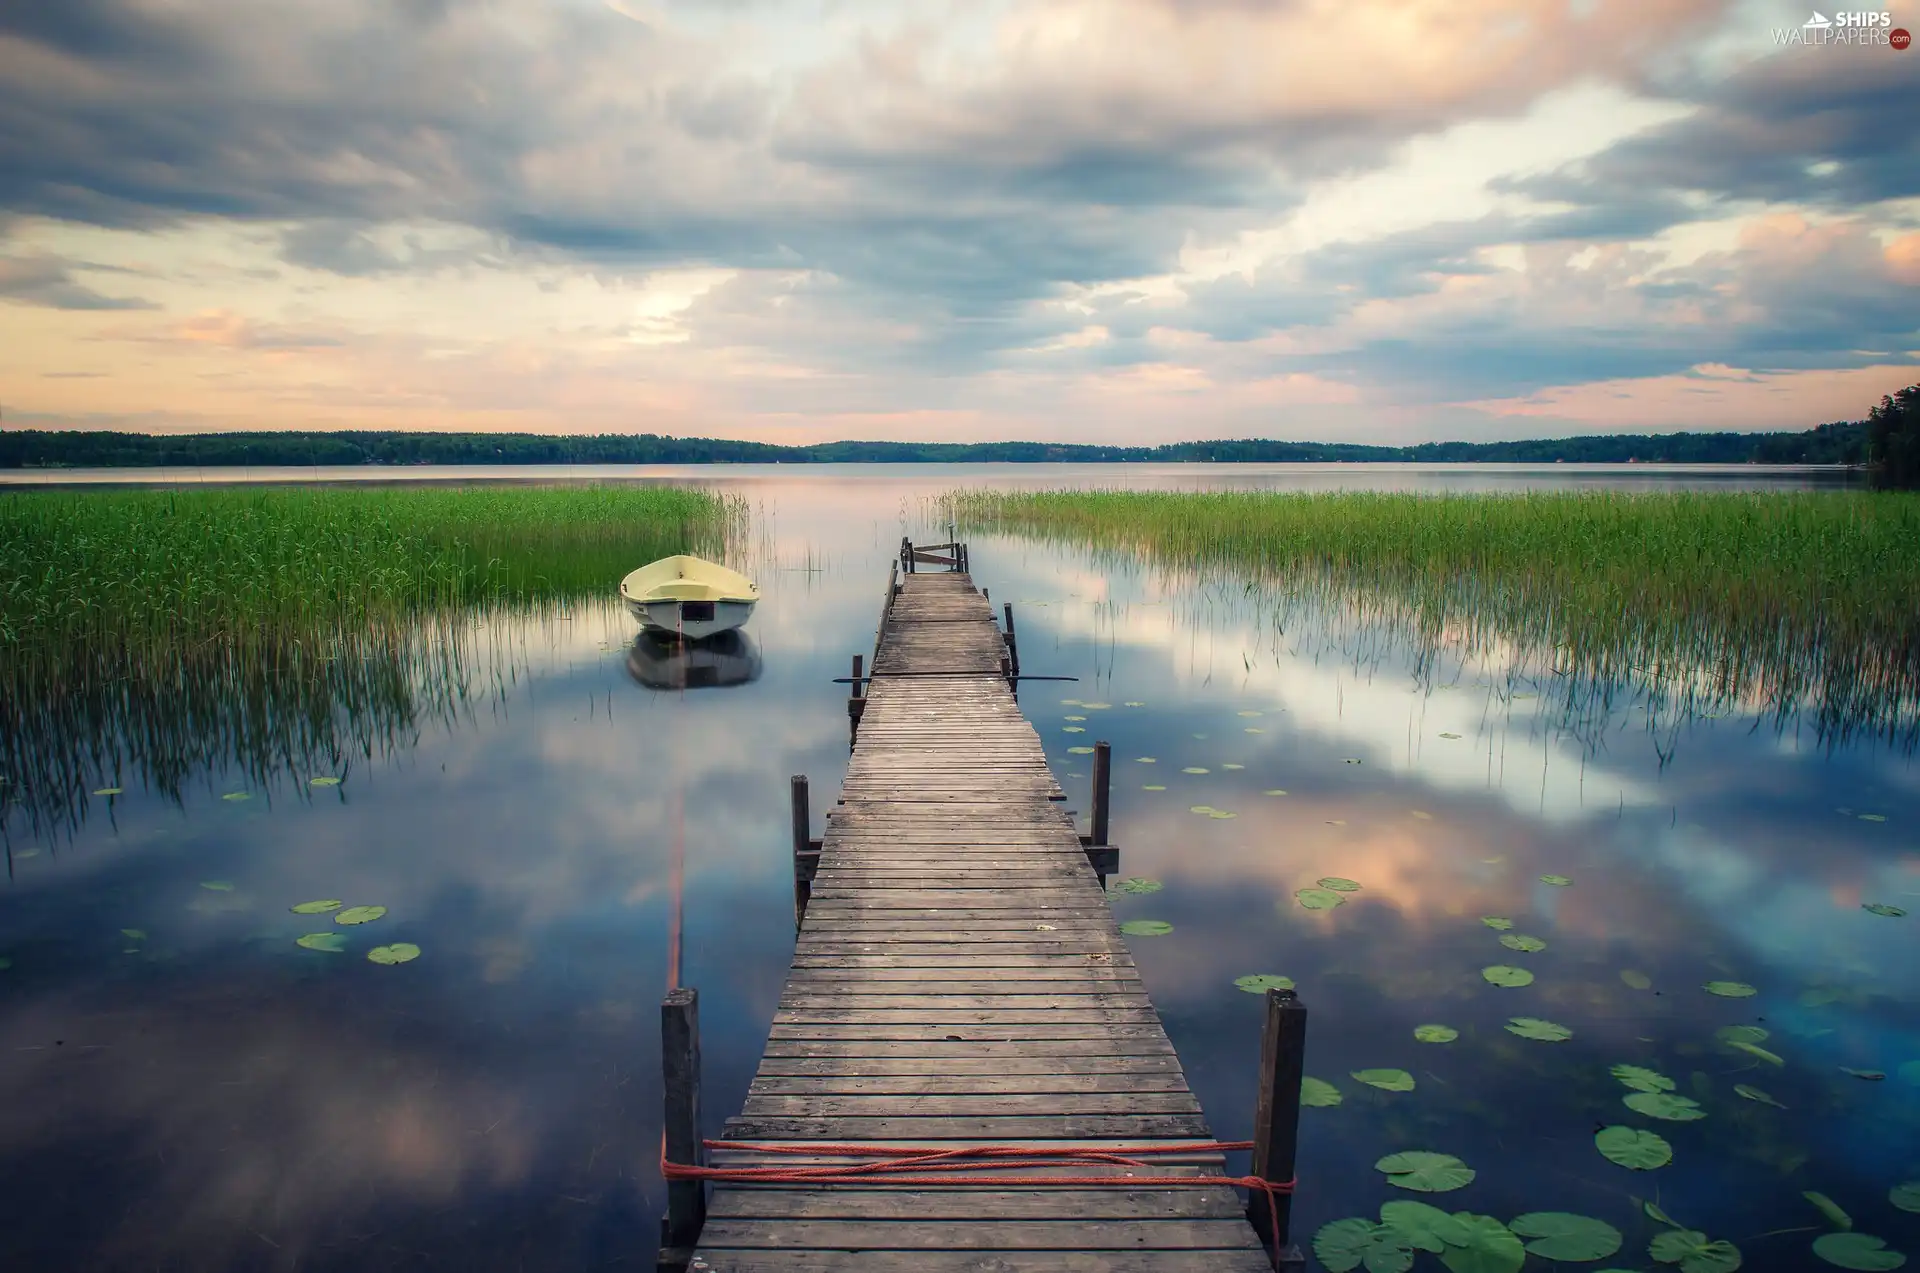 Platform, Boat, viewes, rushes, trees, wooden, lake, forest